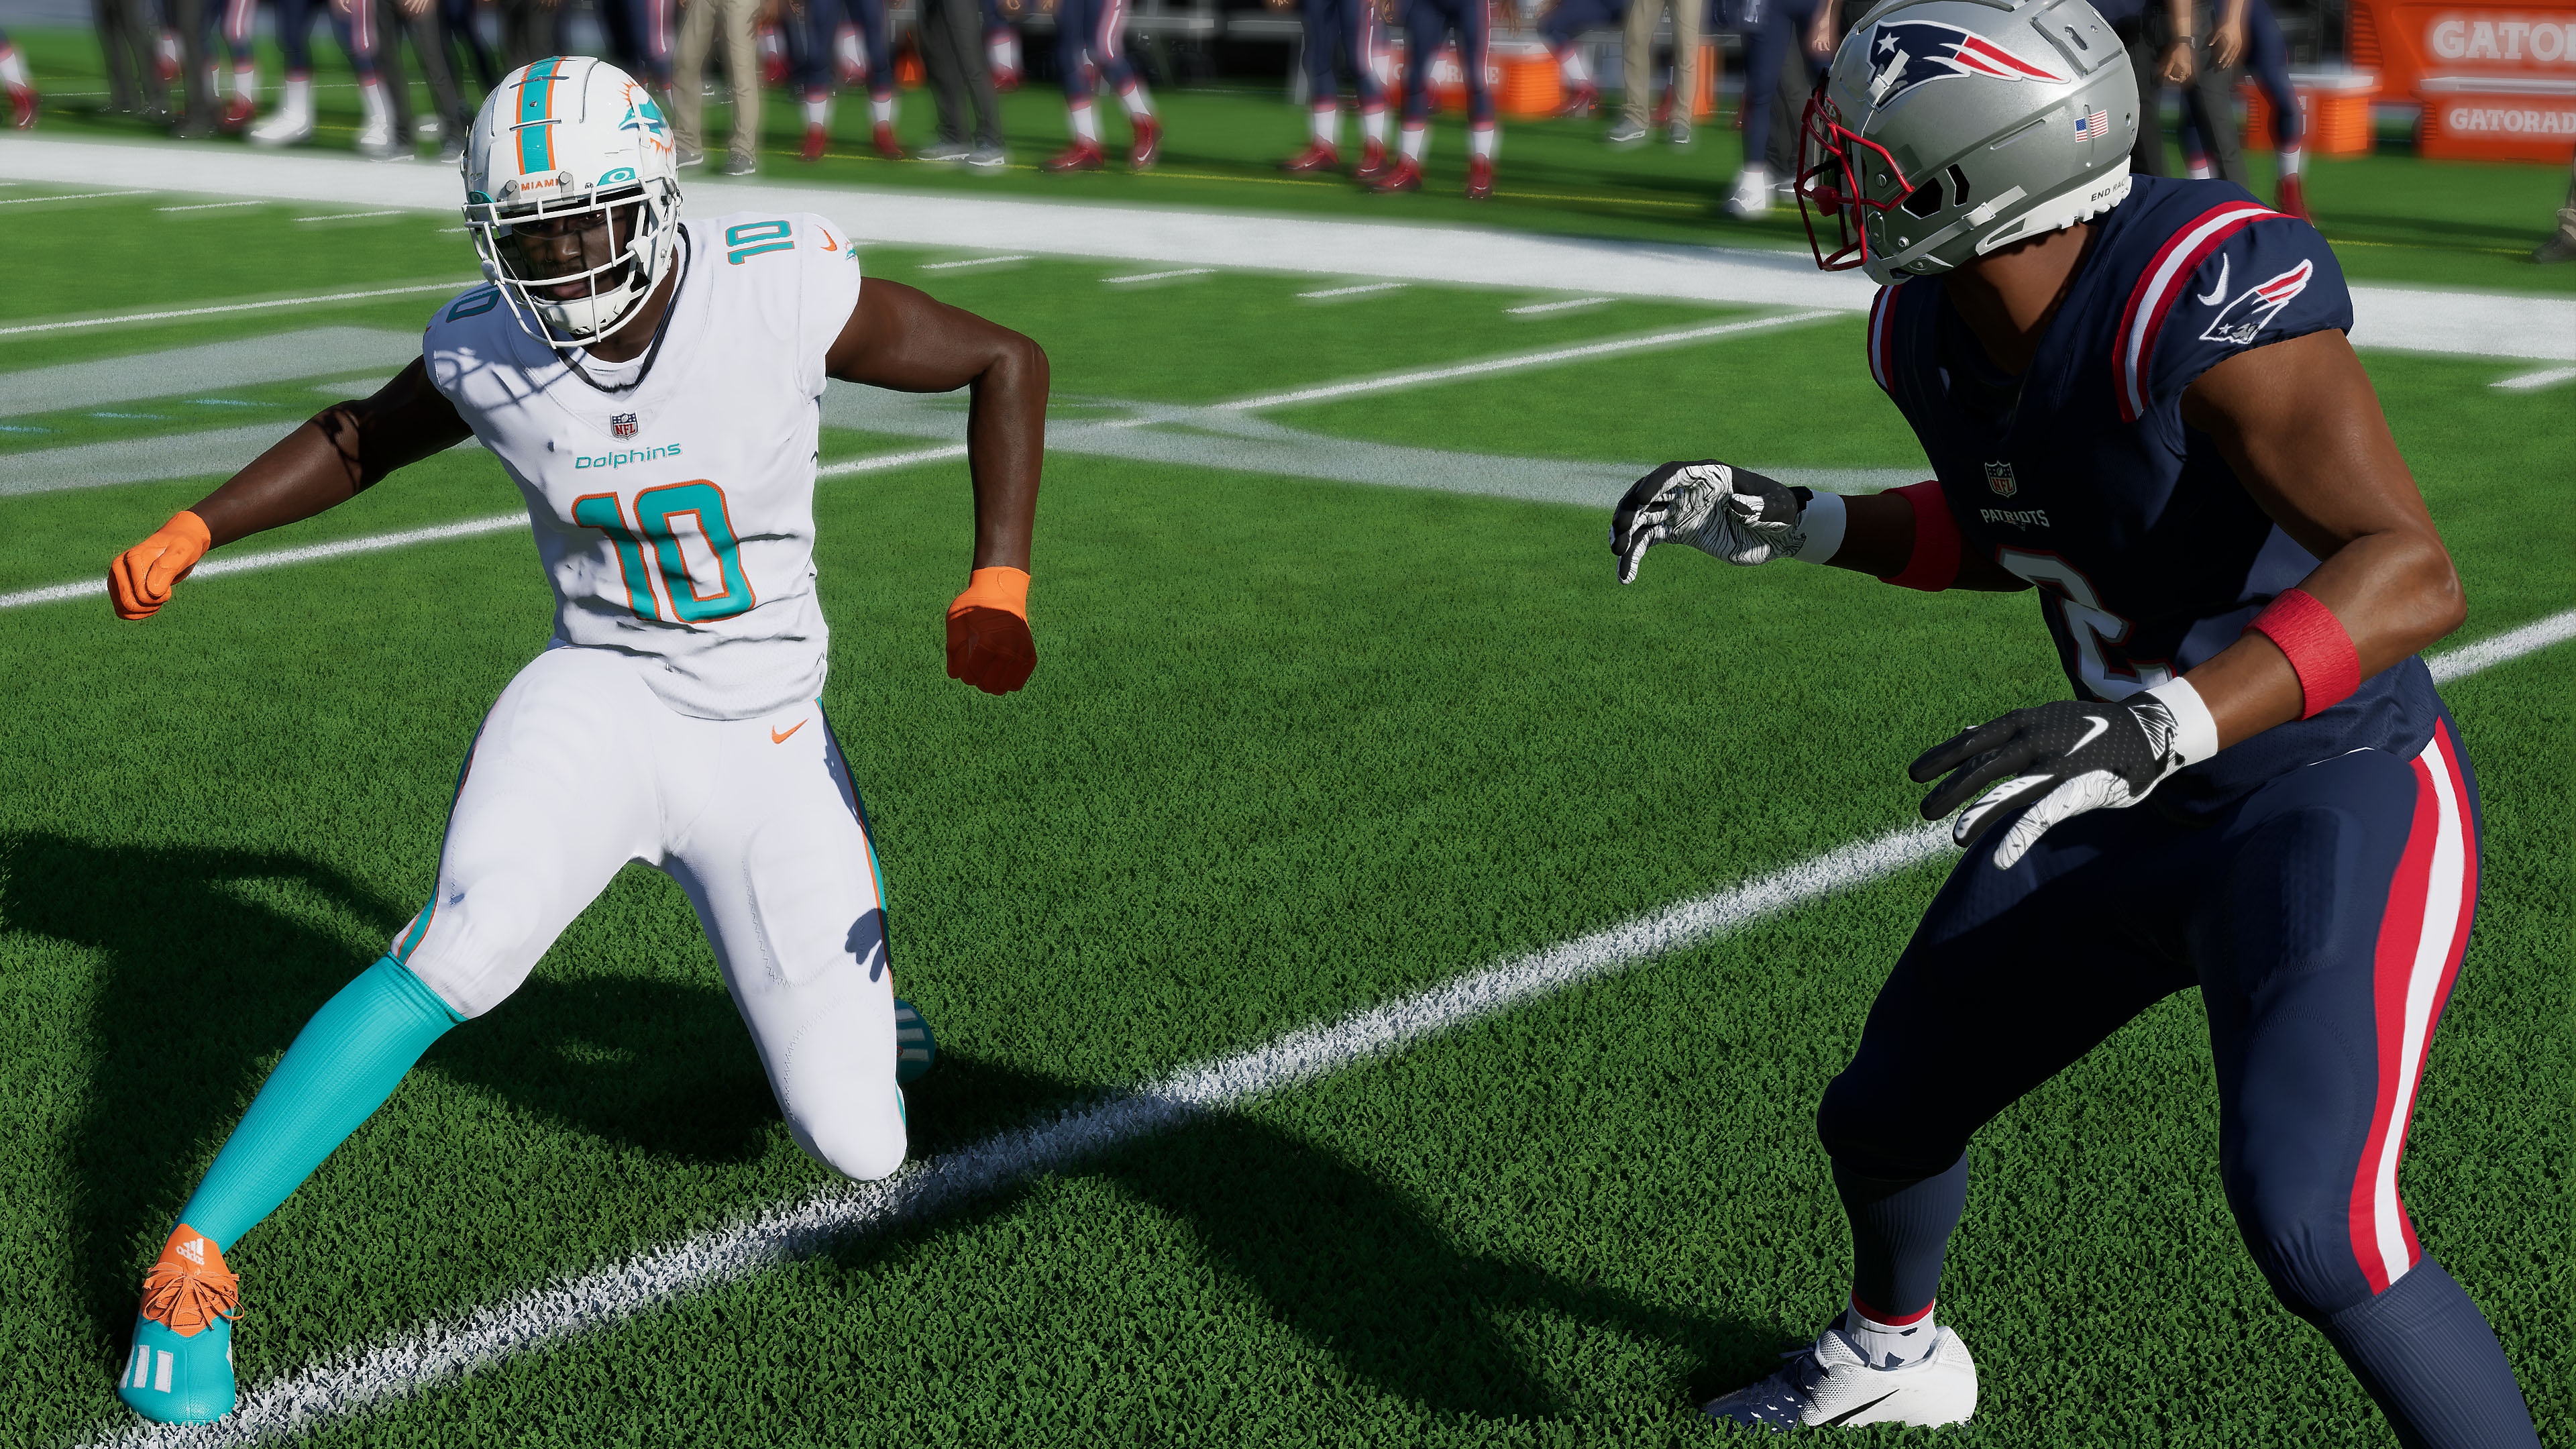 Madden 23 screenshot of players competing for the football